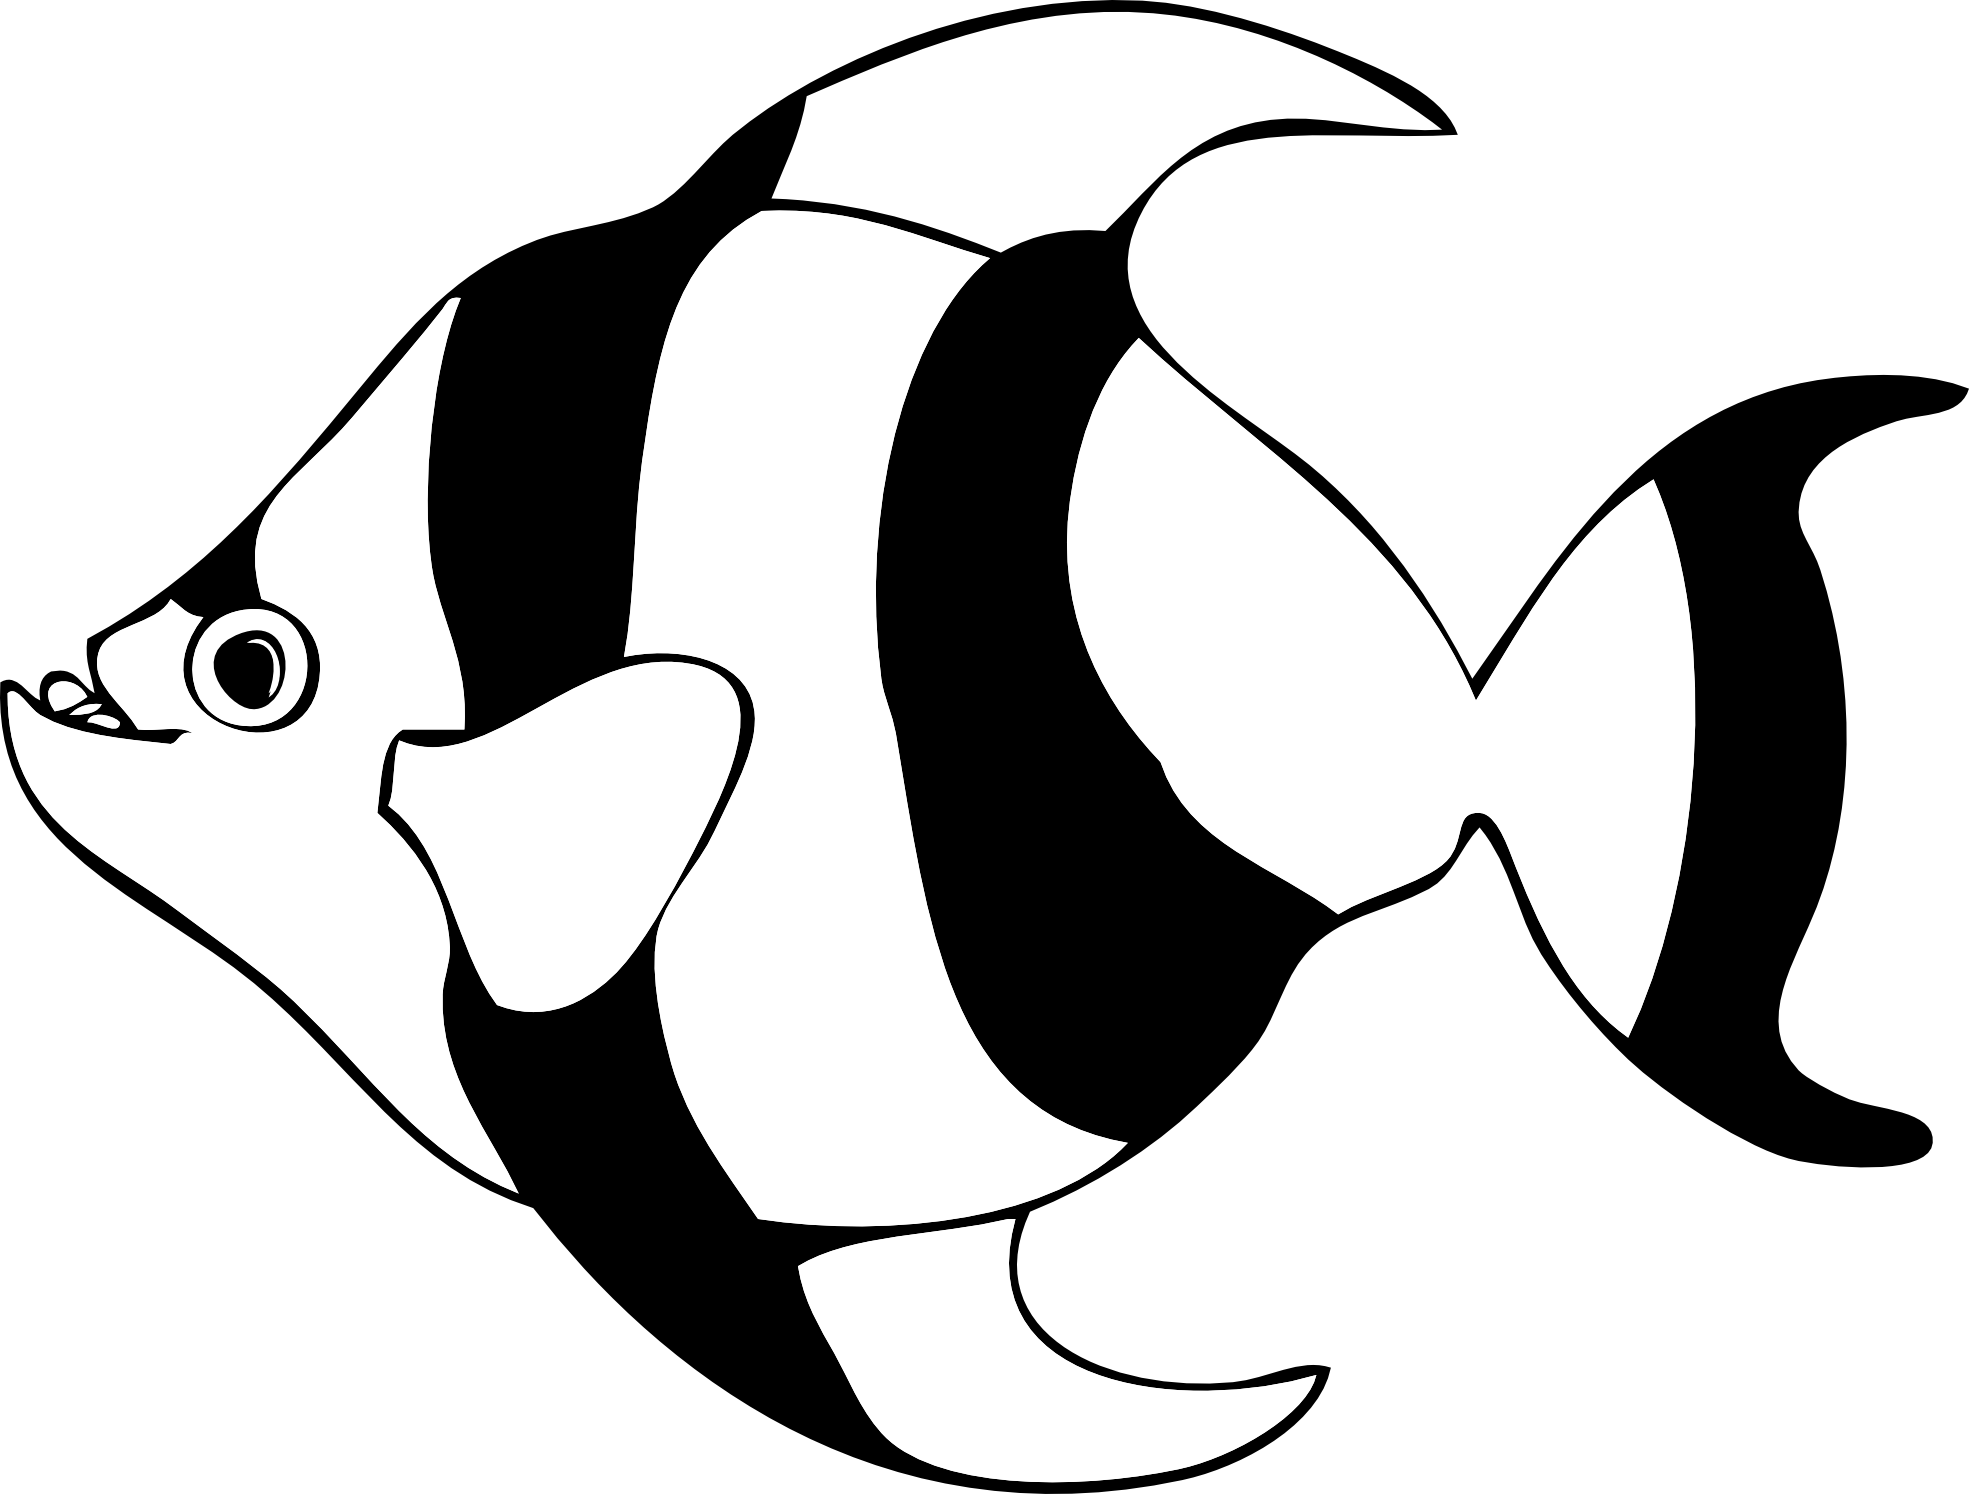 Fish Black And White Drawing - ClipArt Best